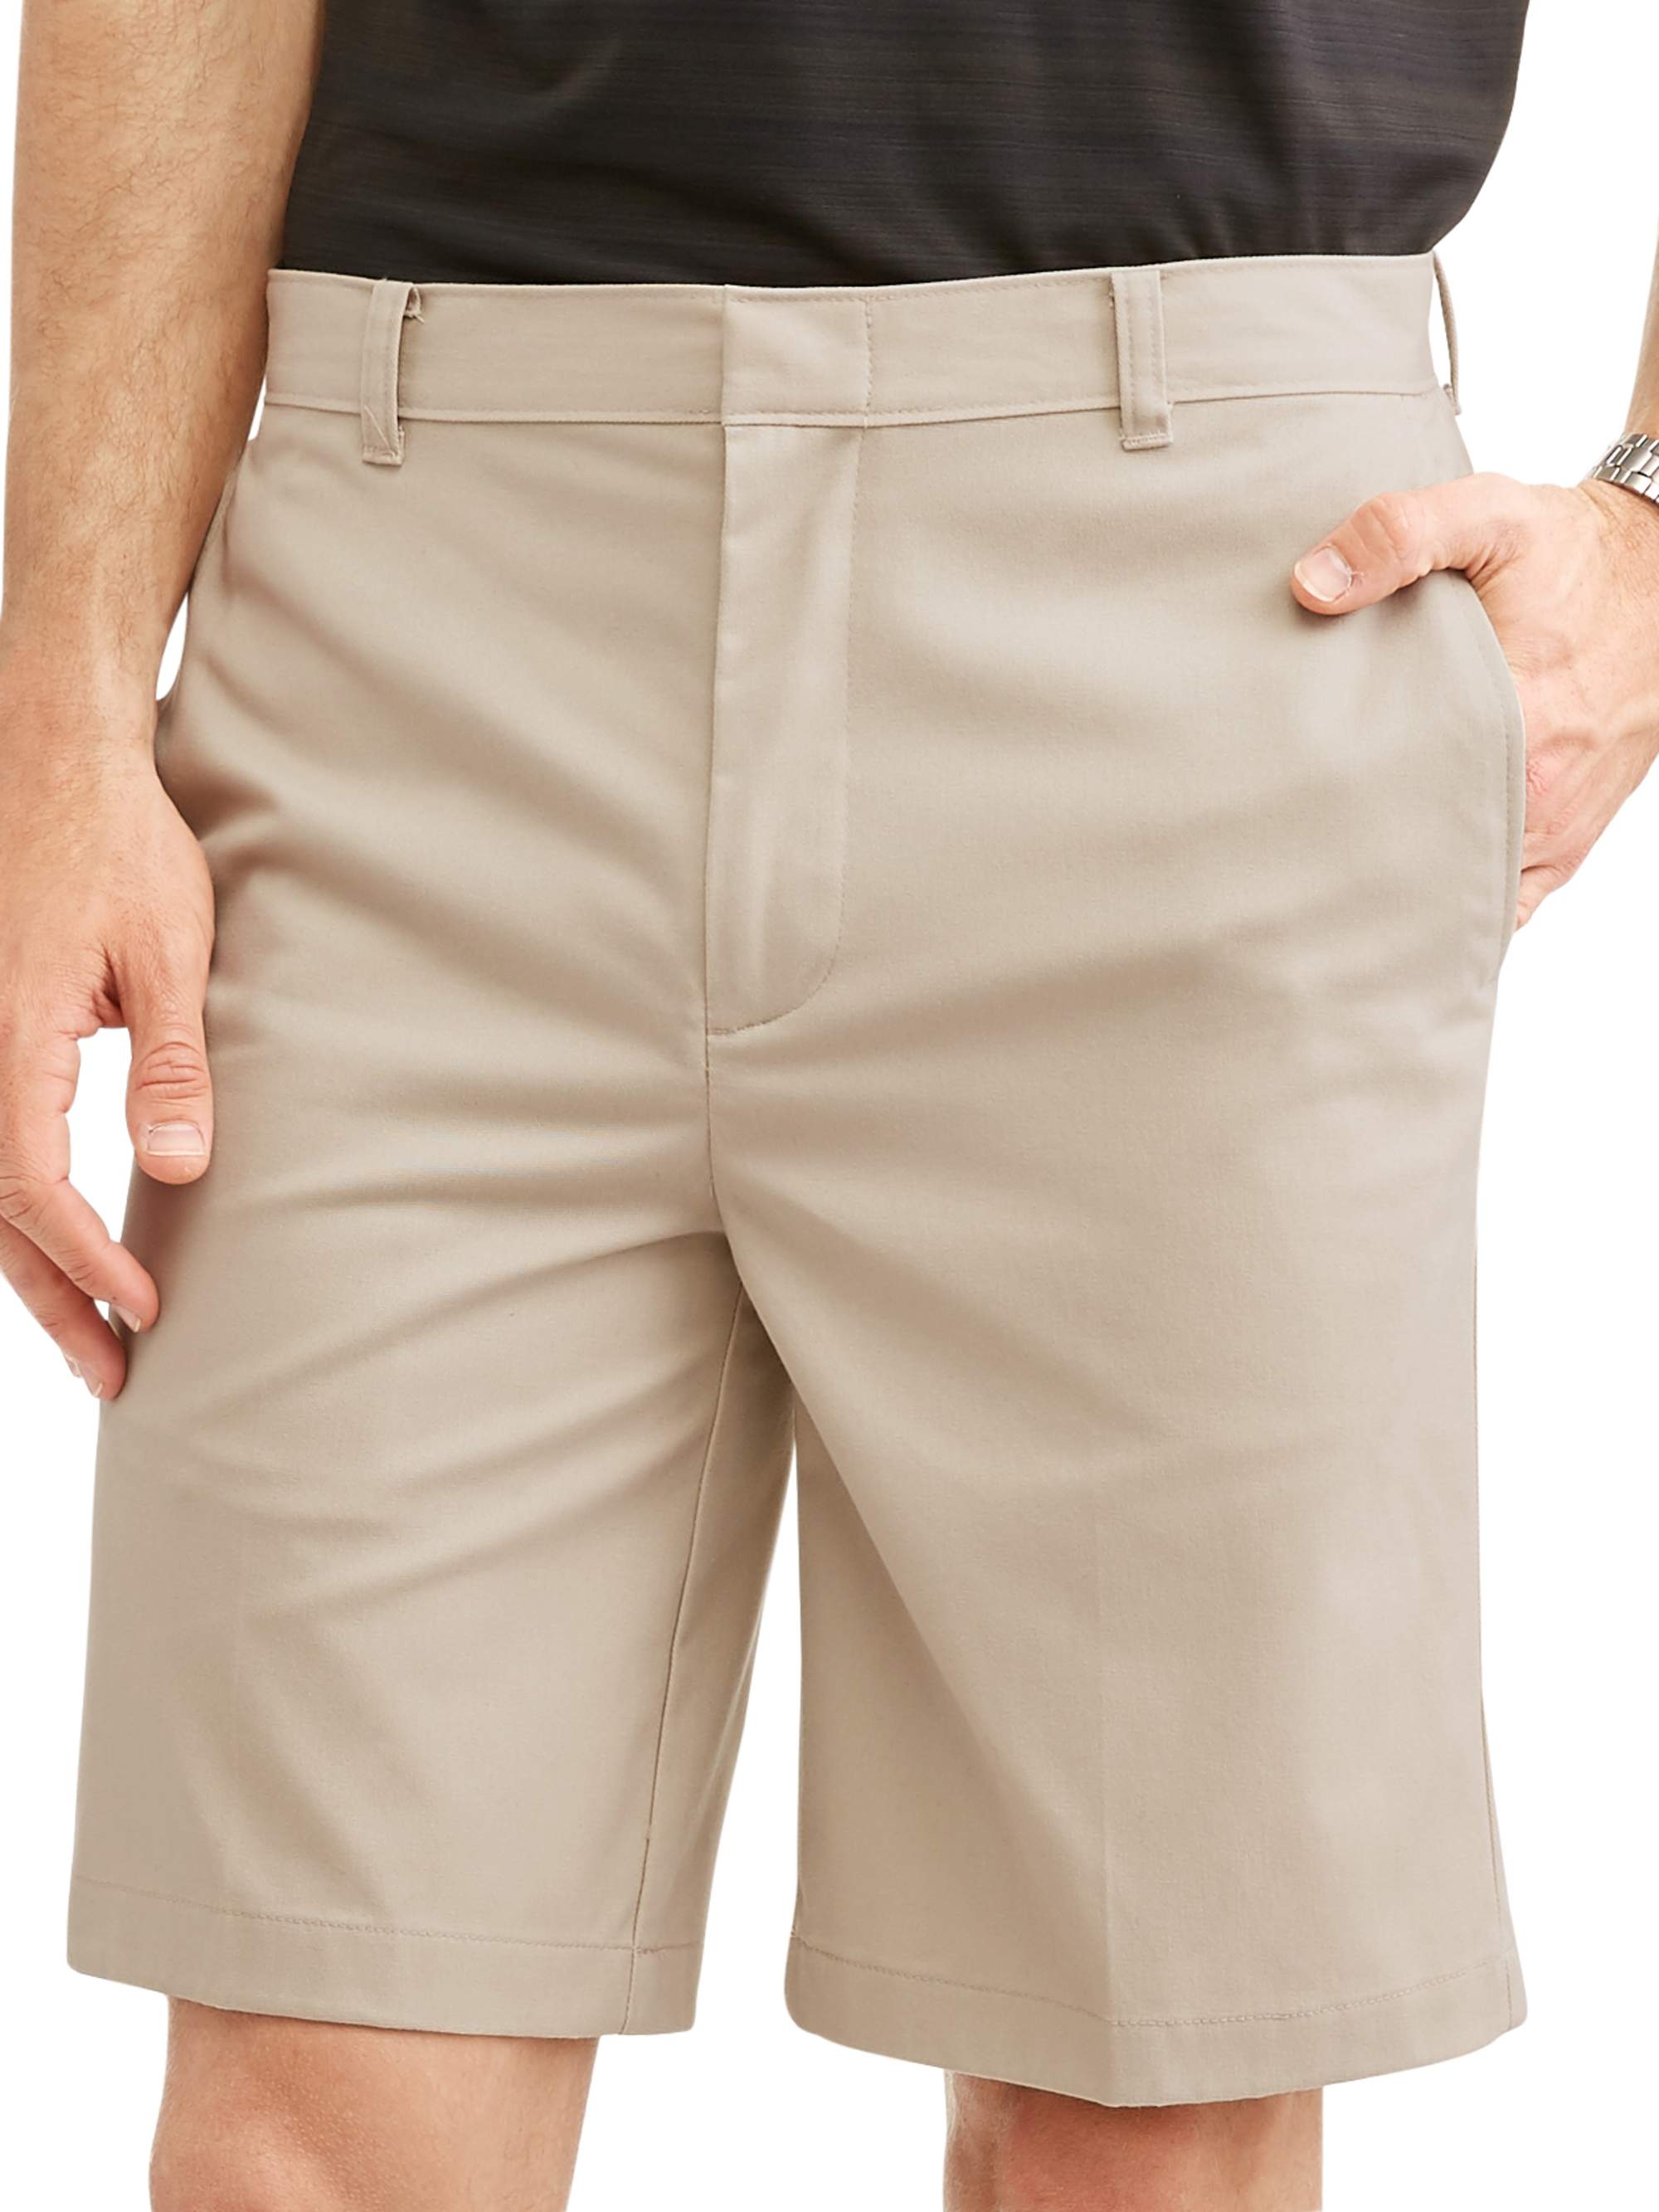 George Men's 9.5" Twill Flat Front Shorts - image 1 of 3